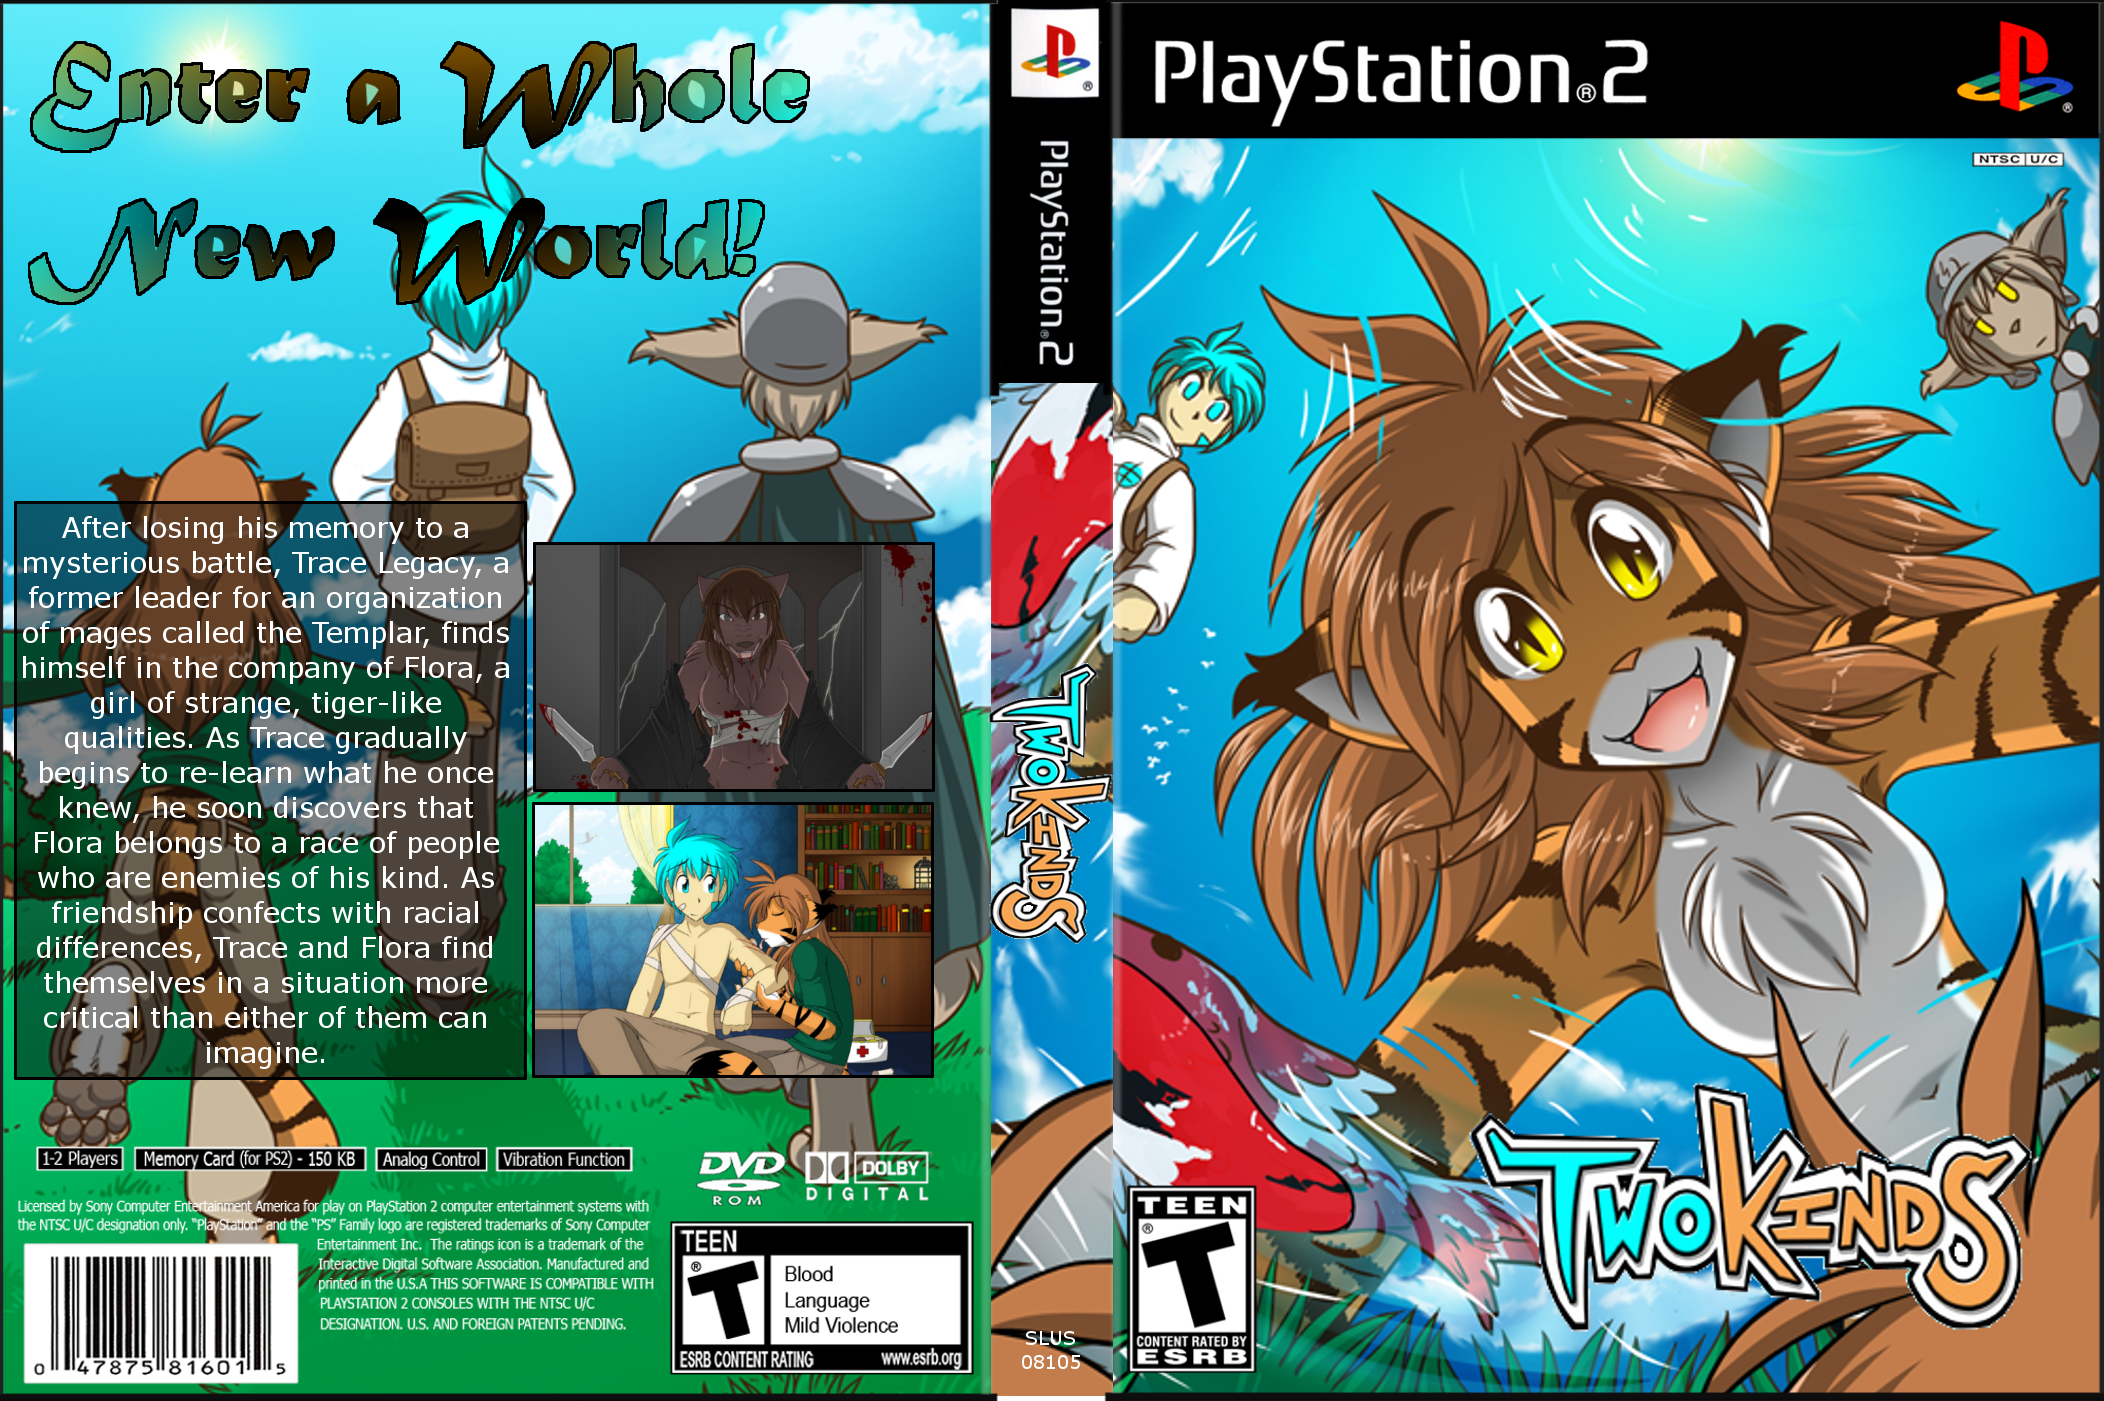 Two Kinds: The Game Ver. 1 box cover